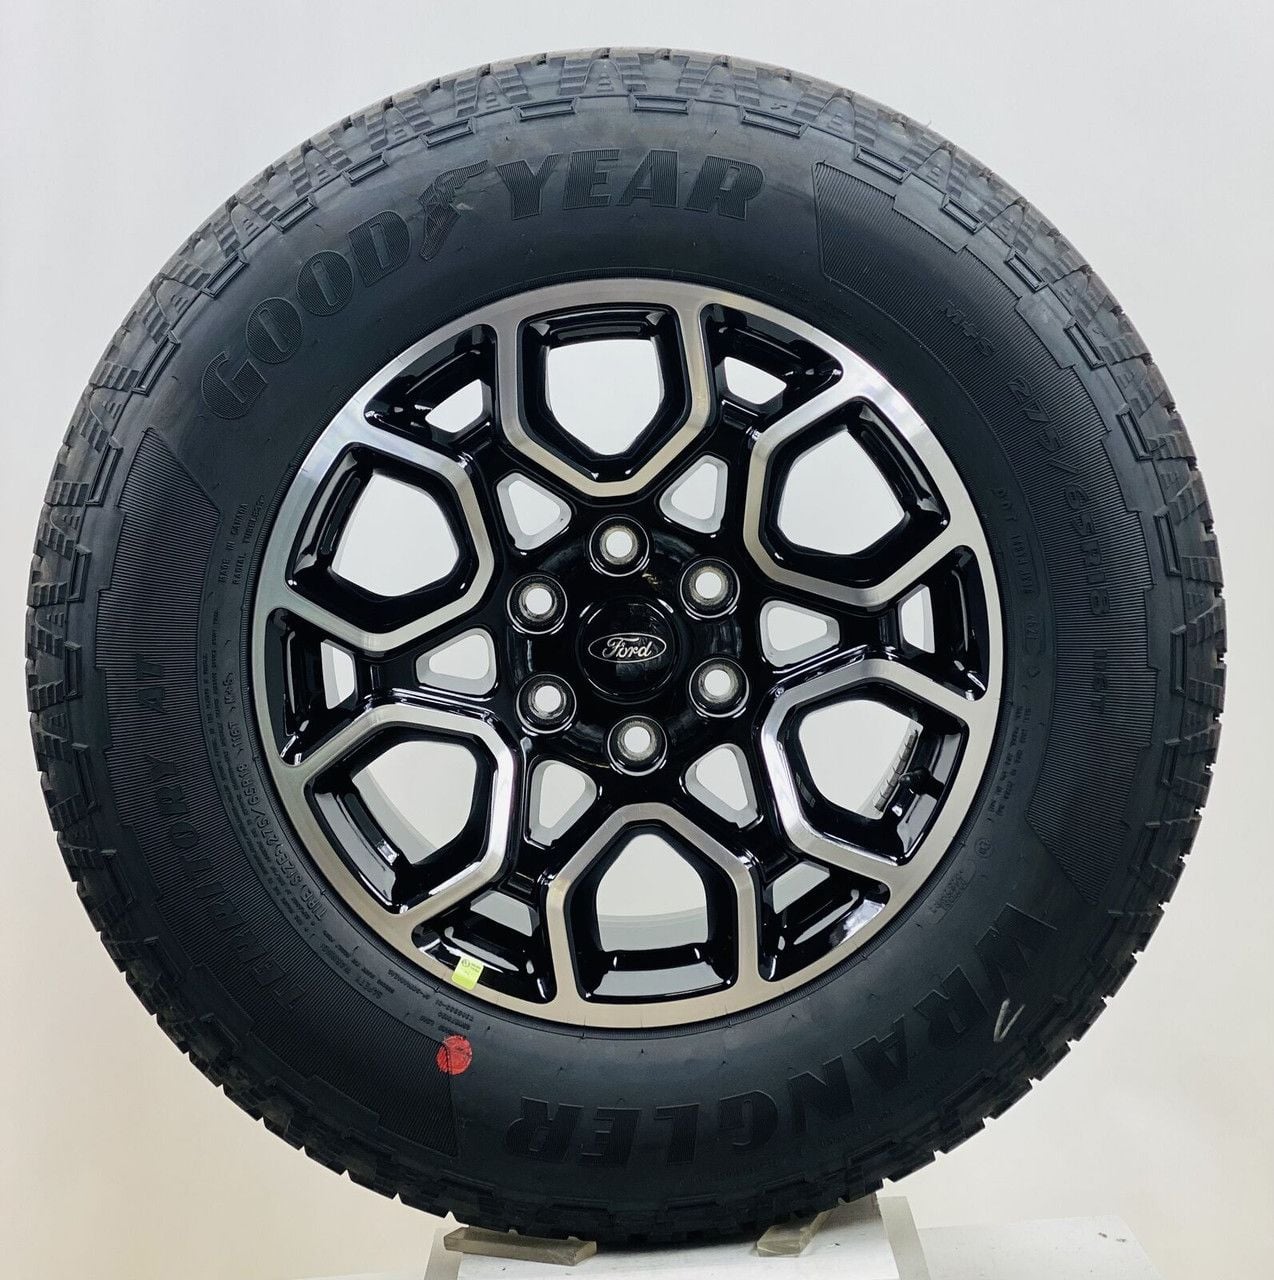 Goodyear Wrangler Territory A/T? - Ford F150 Forum - Community of Ford  Truck Fans